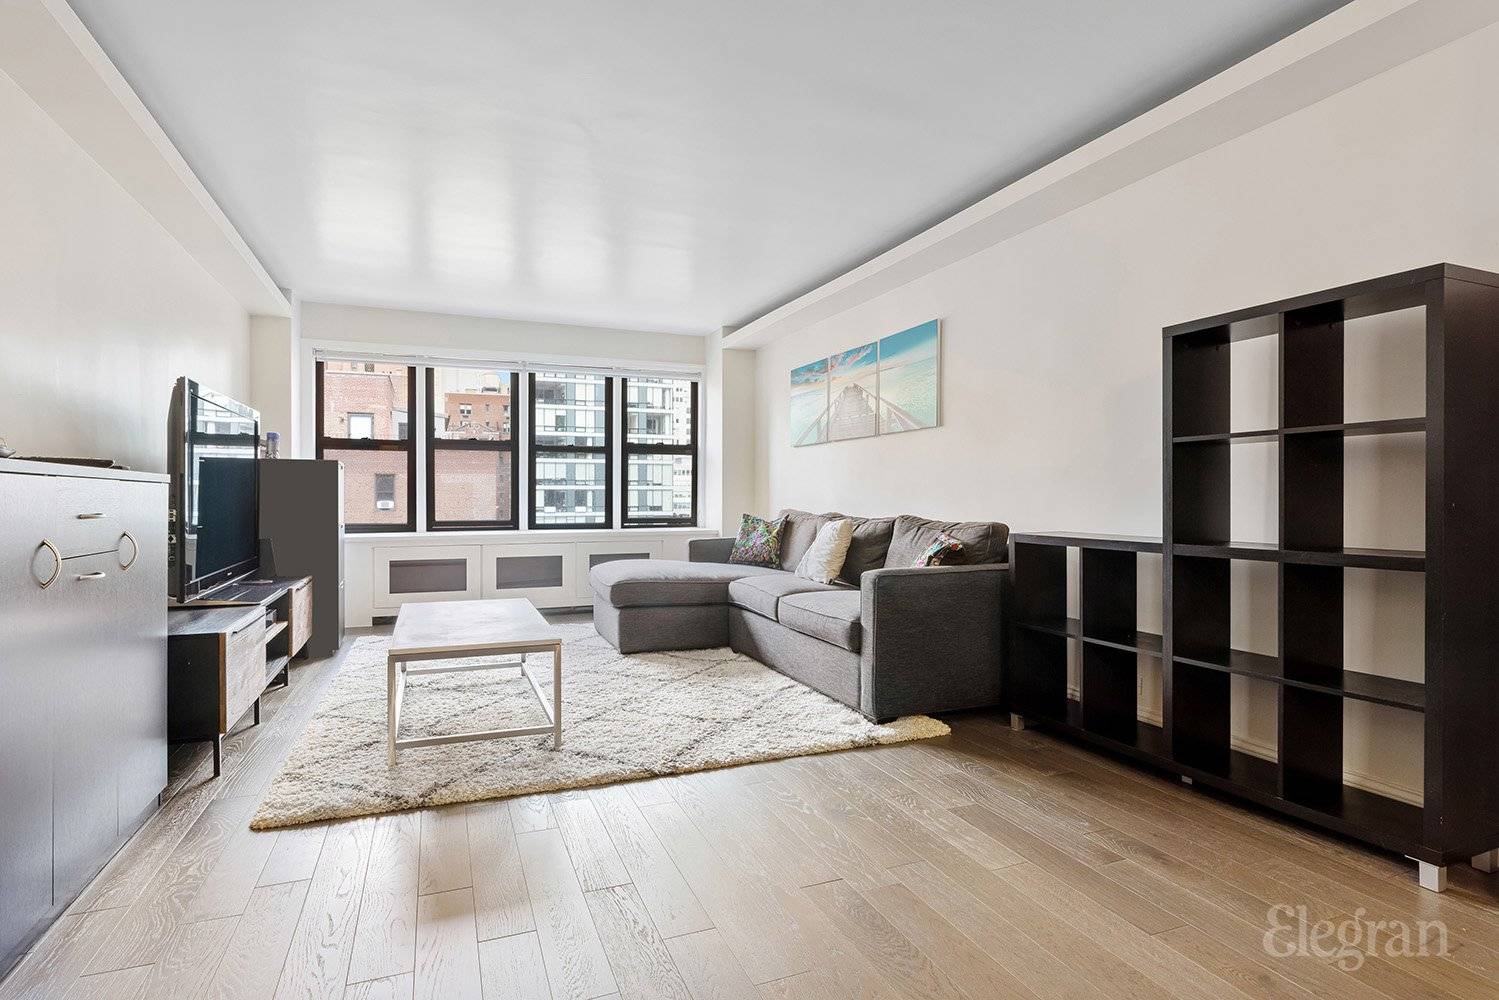 This light filled, spacious and updated apartment is set high within this sought after building in a quiet offset of Third Avenue.